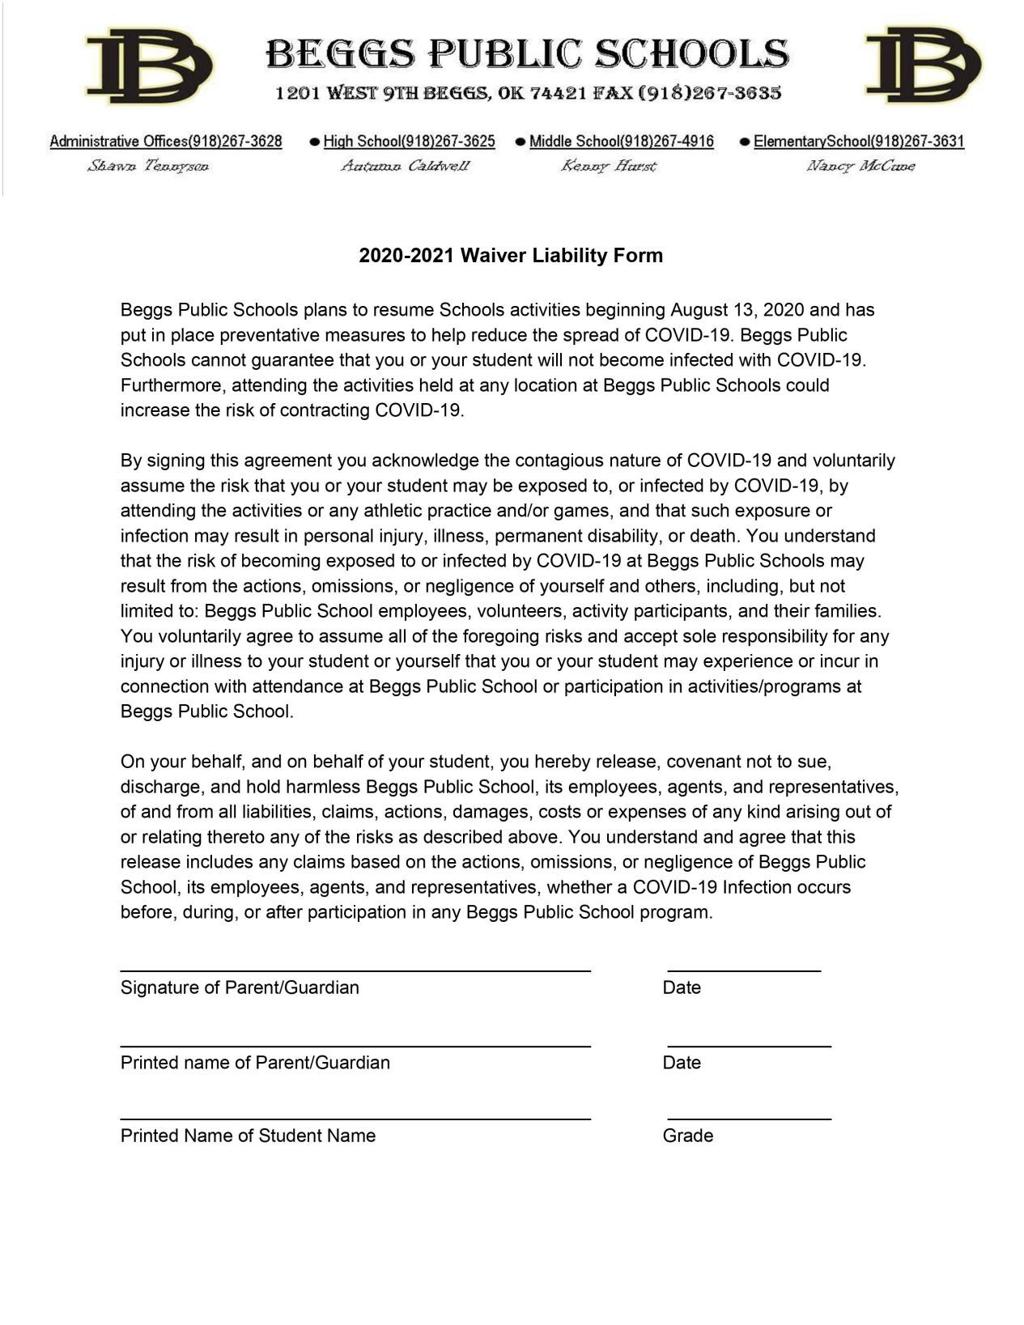 Waiver Of Liability Form Template from bloximages.newyork1.vip.townnews.com